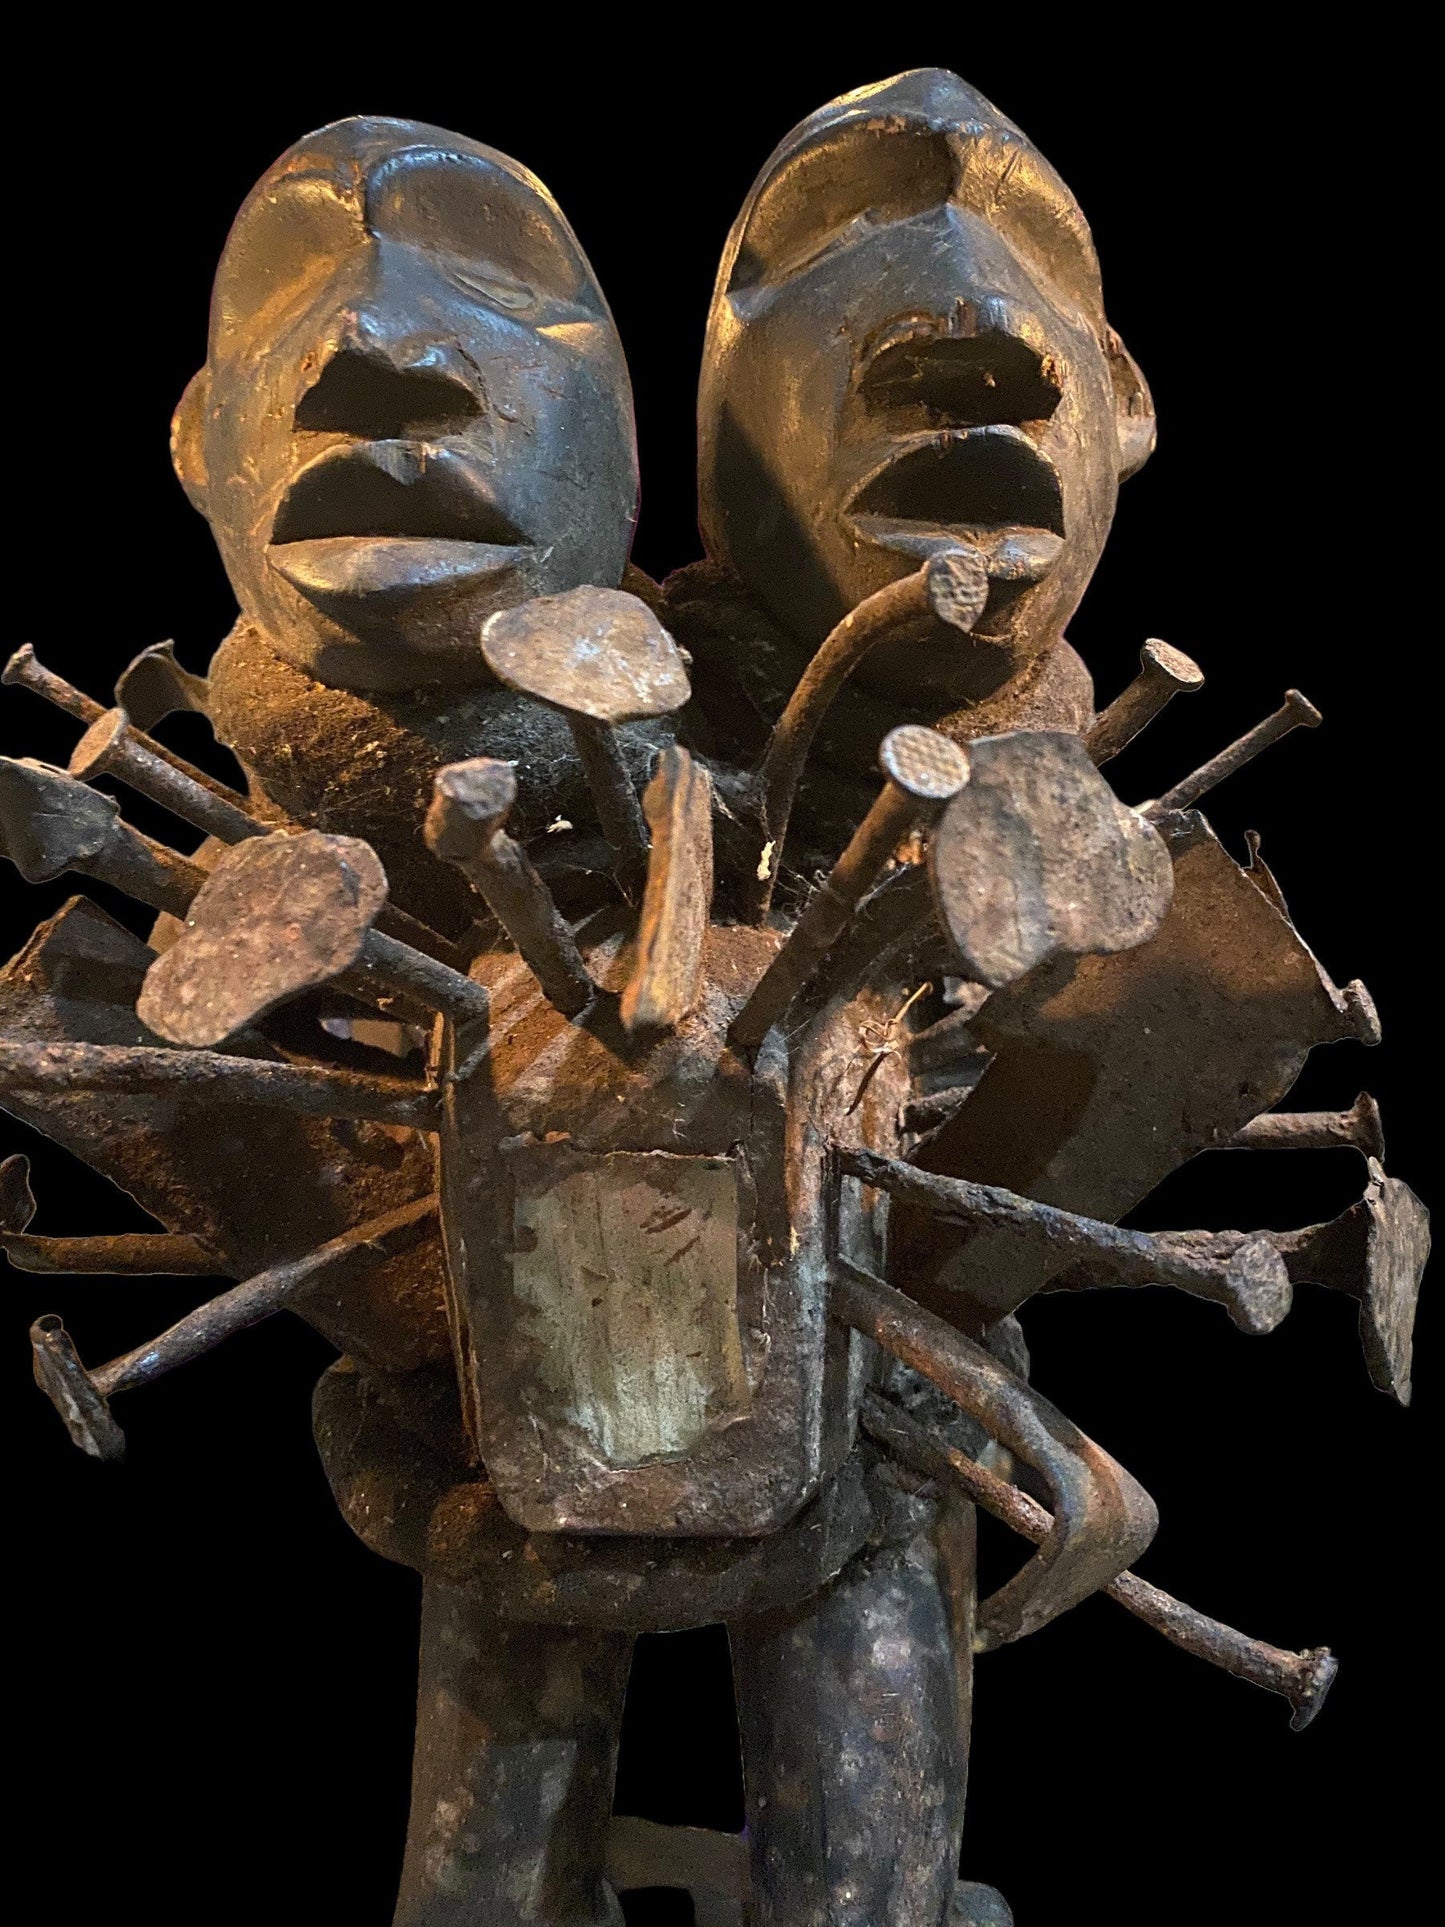 Nkisi Two-Headed with Glass Statue + Fetish from Kongo for Protection + Shigidi + One of a Kind